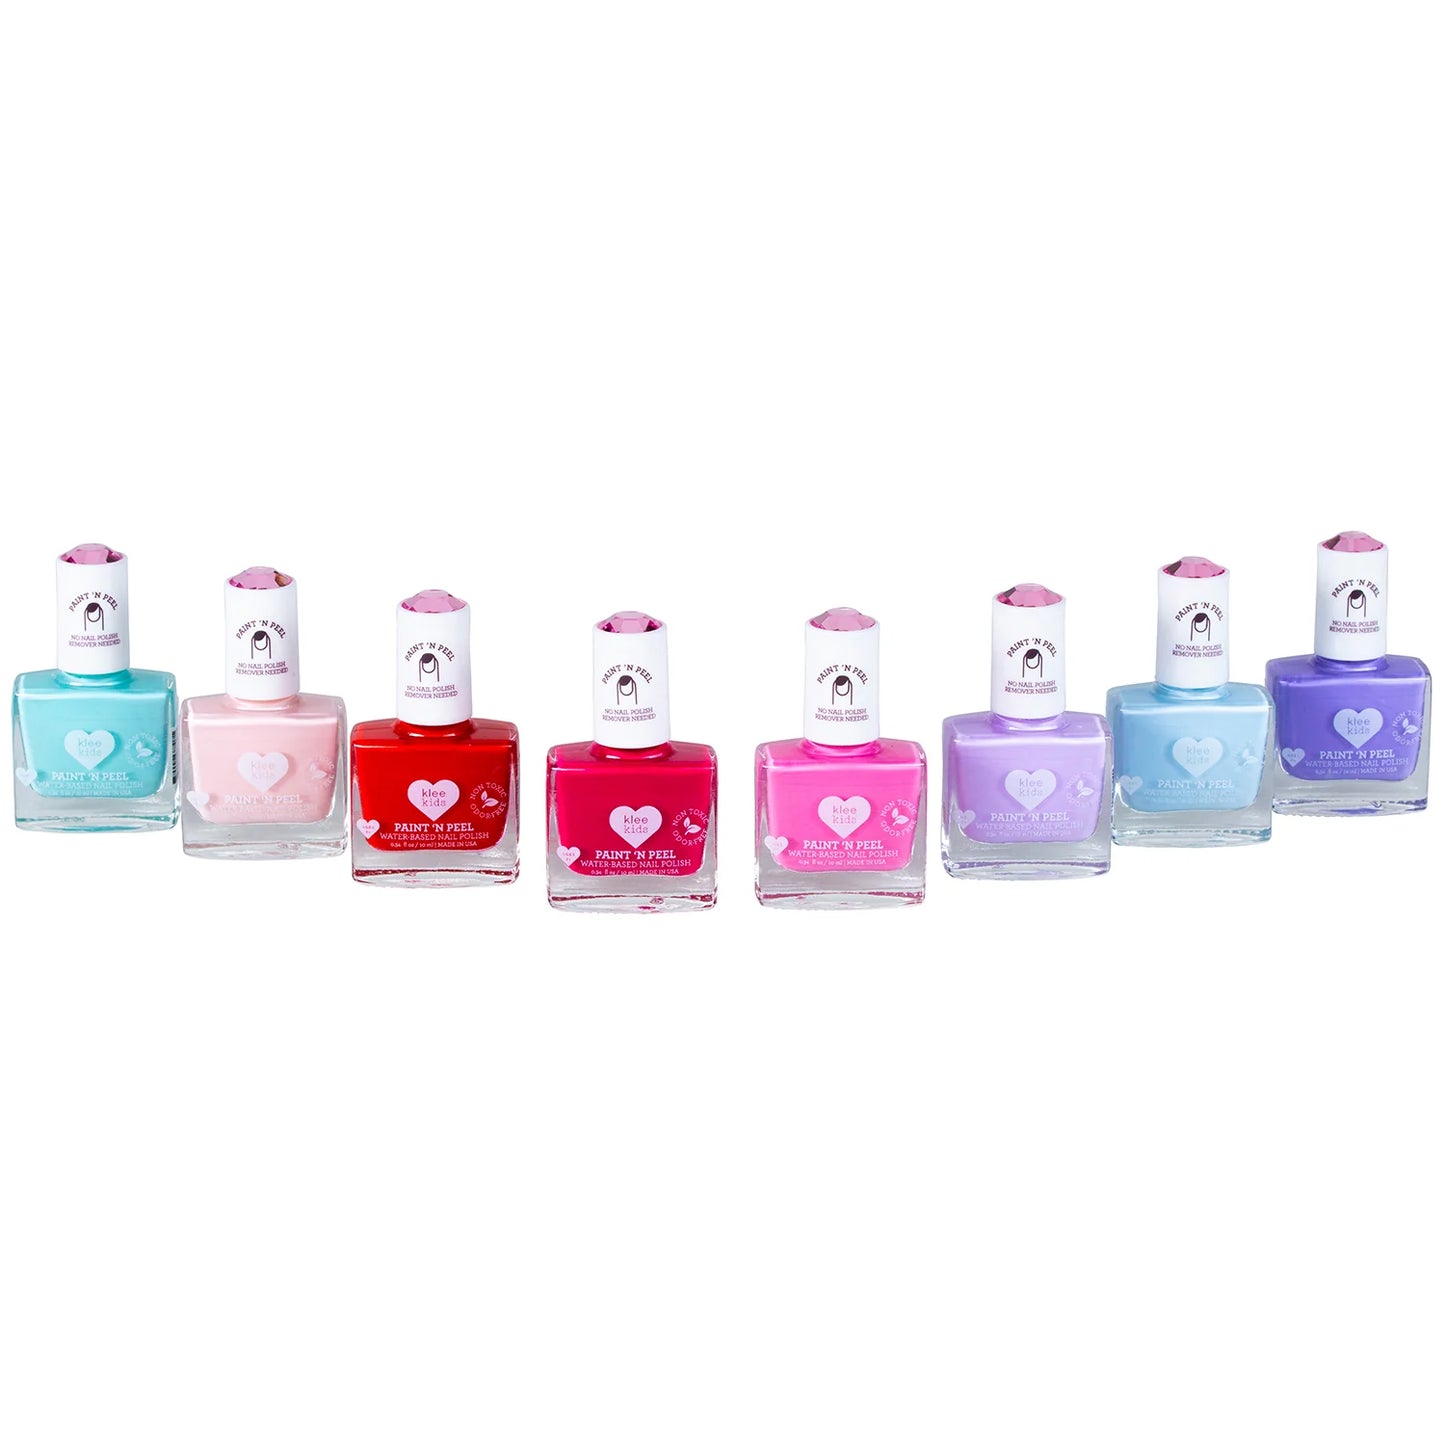 Paint 'N Peel Non-Toxic Water Based Nail Polish for Kids